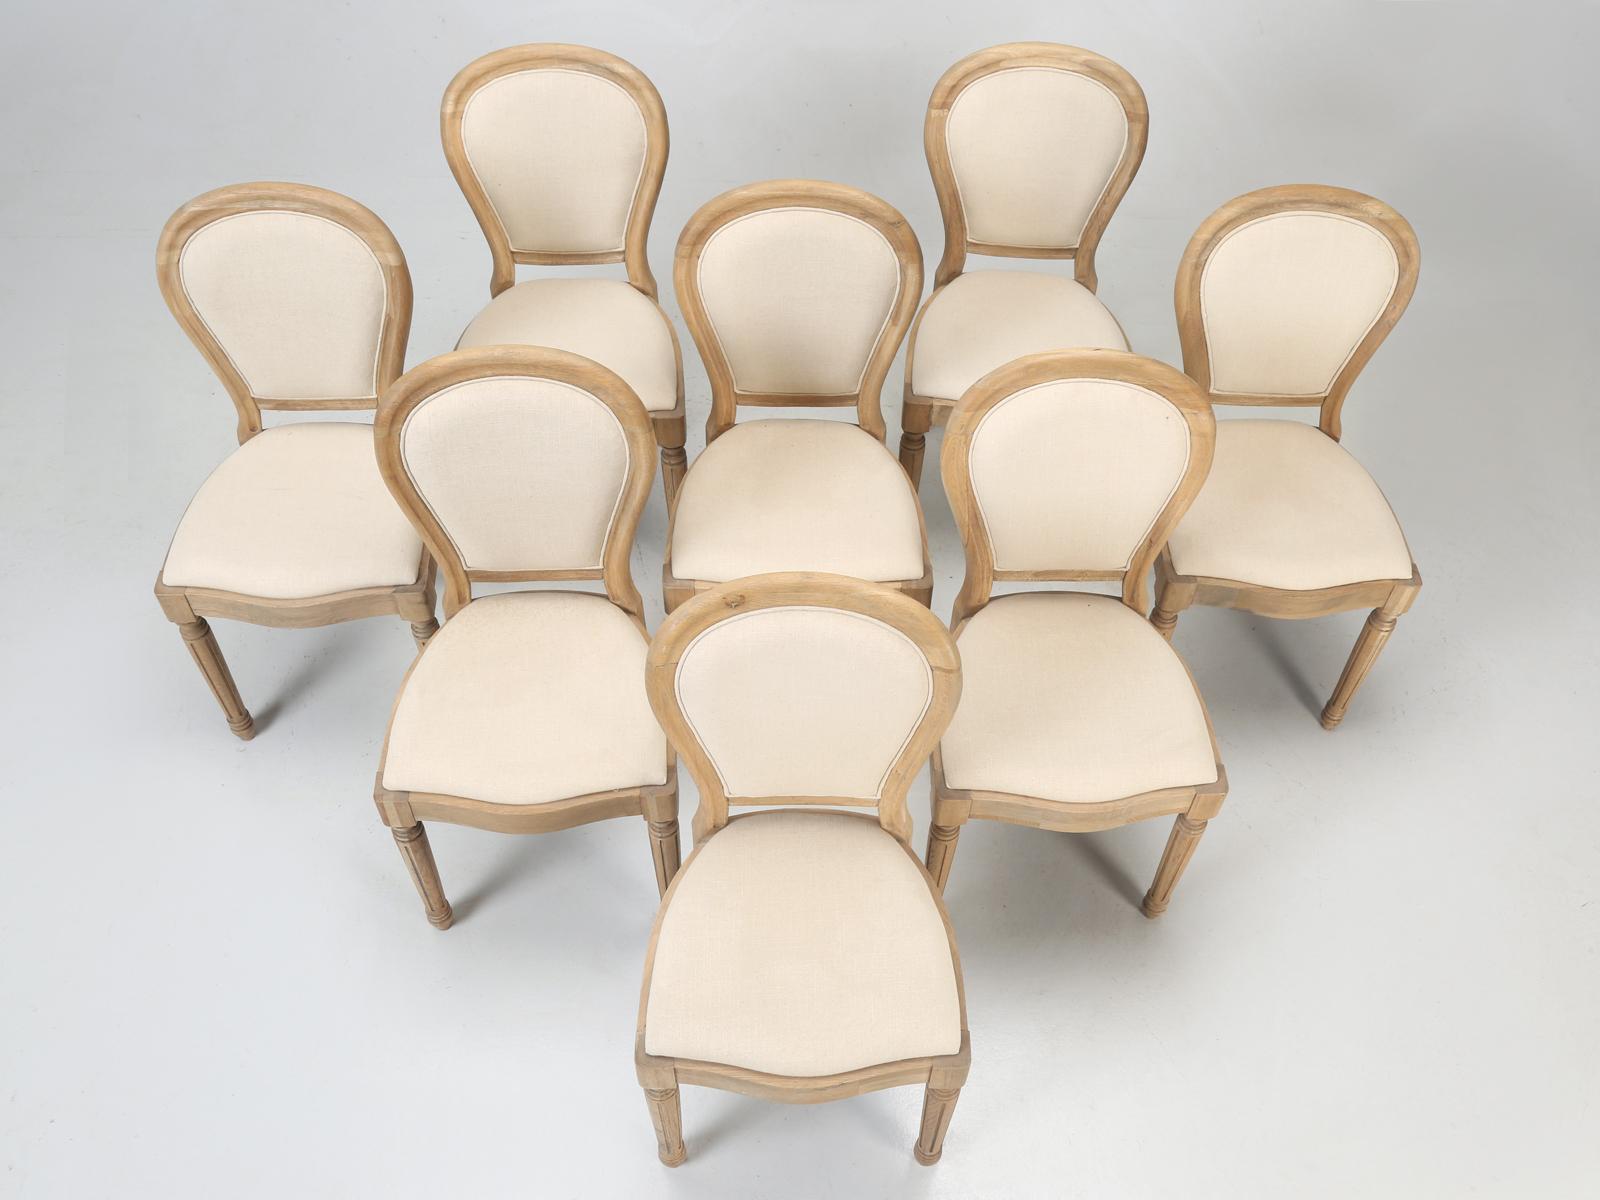 Contemporary French Louis XVI Style Dining Chairs in White Oak, Set of 8